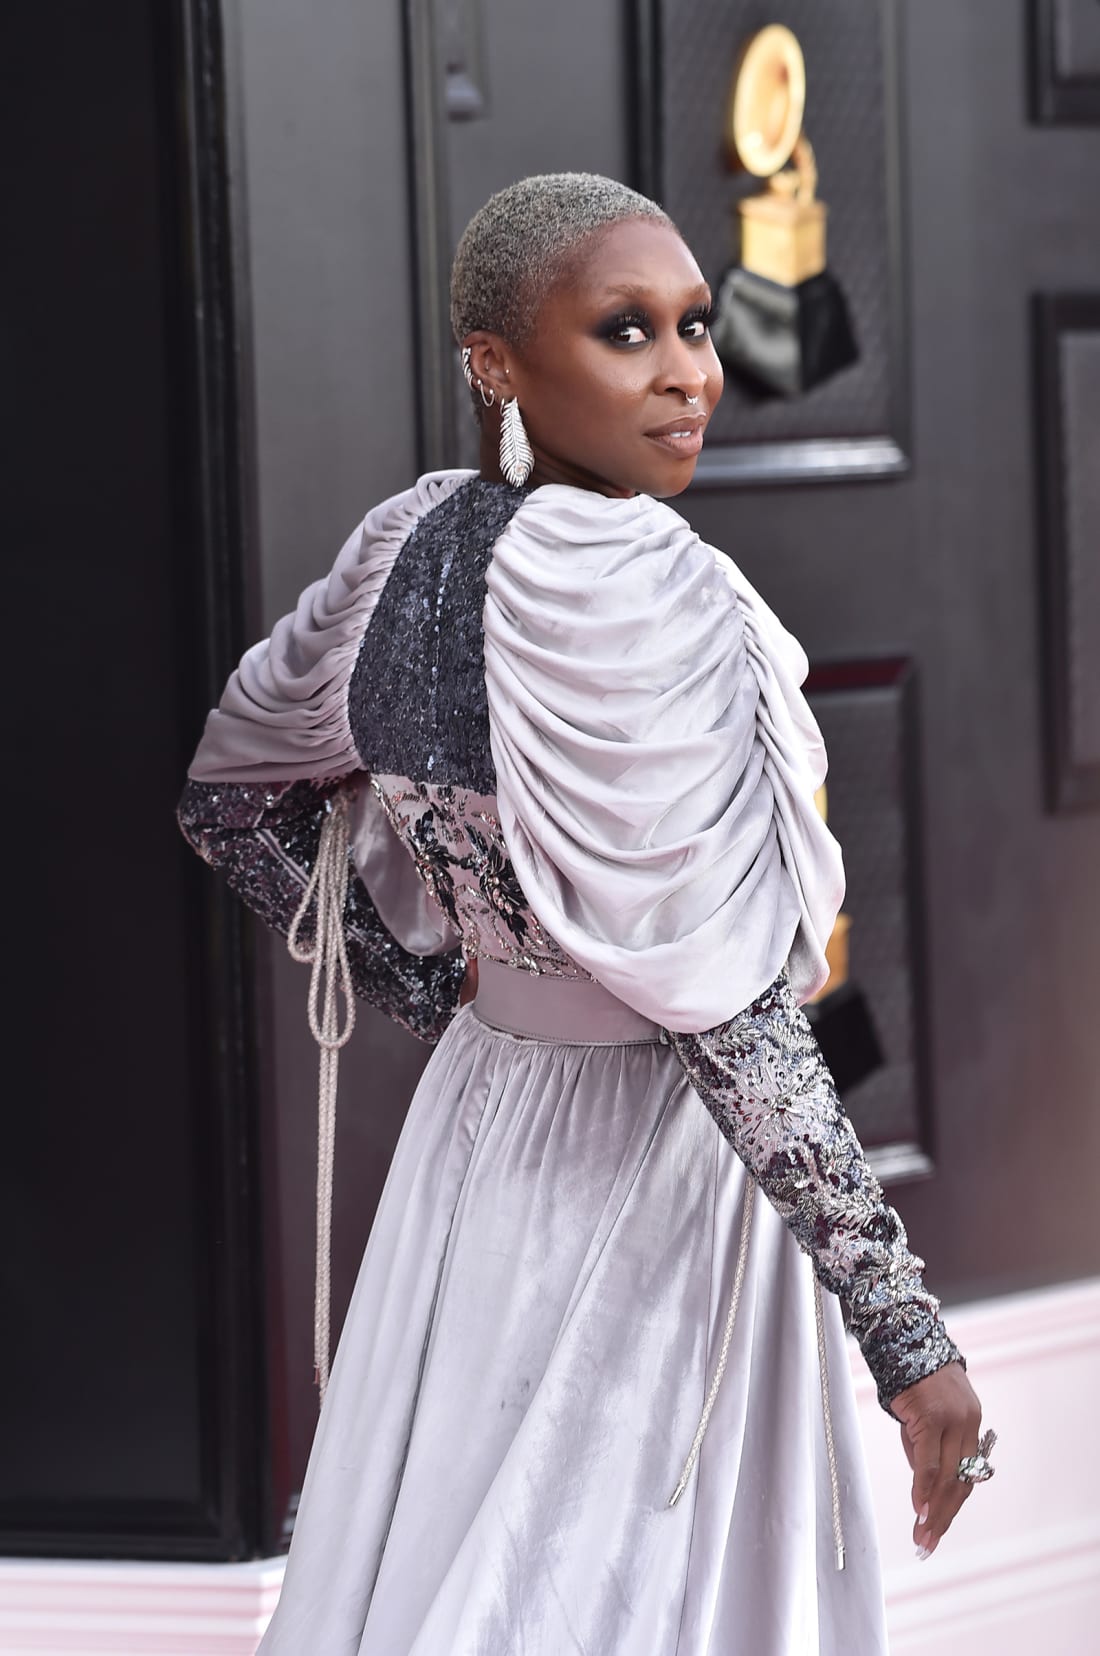 Cynthia Erivo channeling a metallic look in a custom Louis Vuitton ensemble with shoulders draped in velvet and satin.  